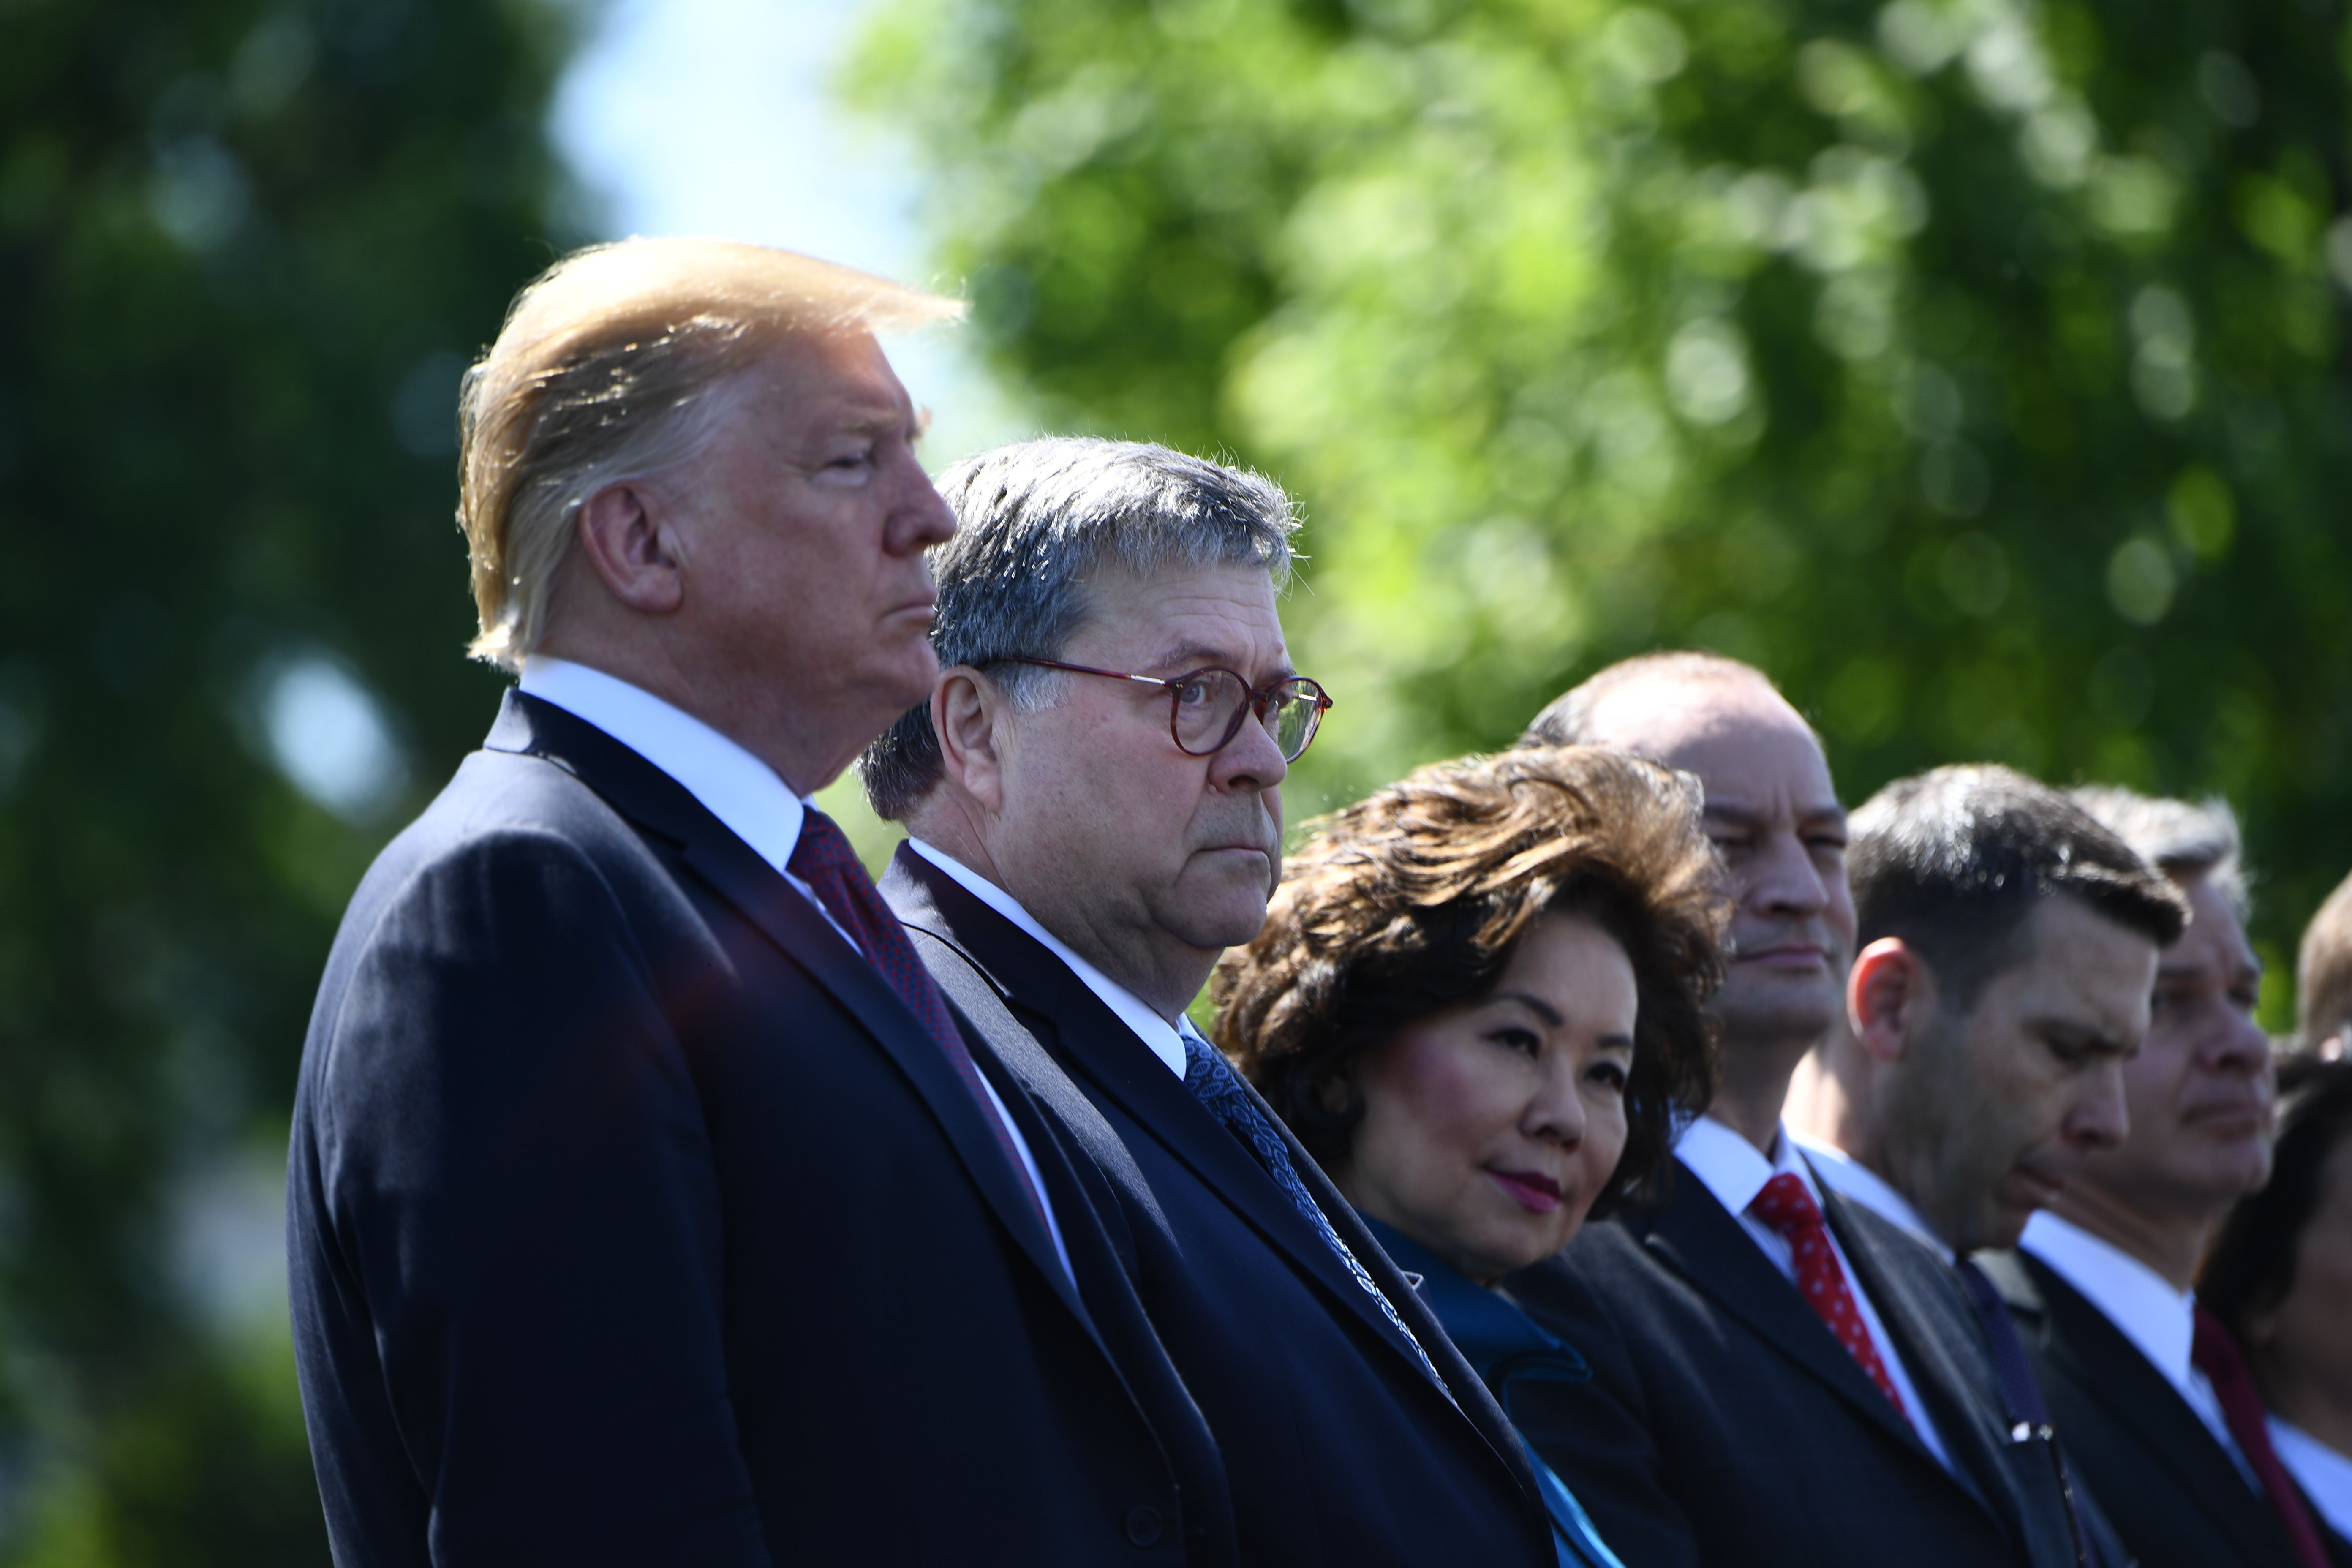 US President Donald Trump, Attorney General William Barr, Transportation Secretary Elaine Chao, Secretary of Labor Alex Acosta, Acting Secretary of Homeland Security Kevin McAleenan and FBI Director Christopher Wray attend the 38th Annual National Peace Officers Memorial Service on May 15, 2019, in Washington, DC. (BRENDAN SMIALOWSKI/AFP/Getty Images)